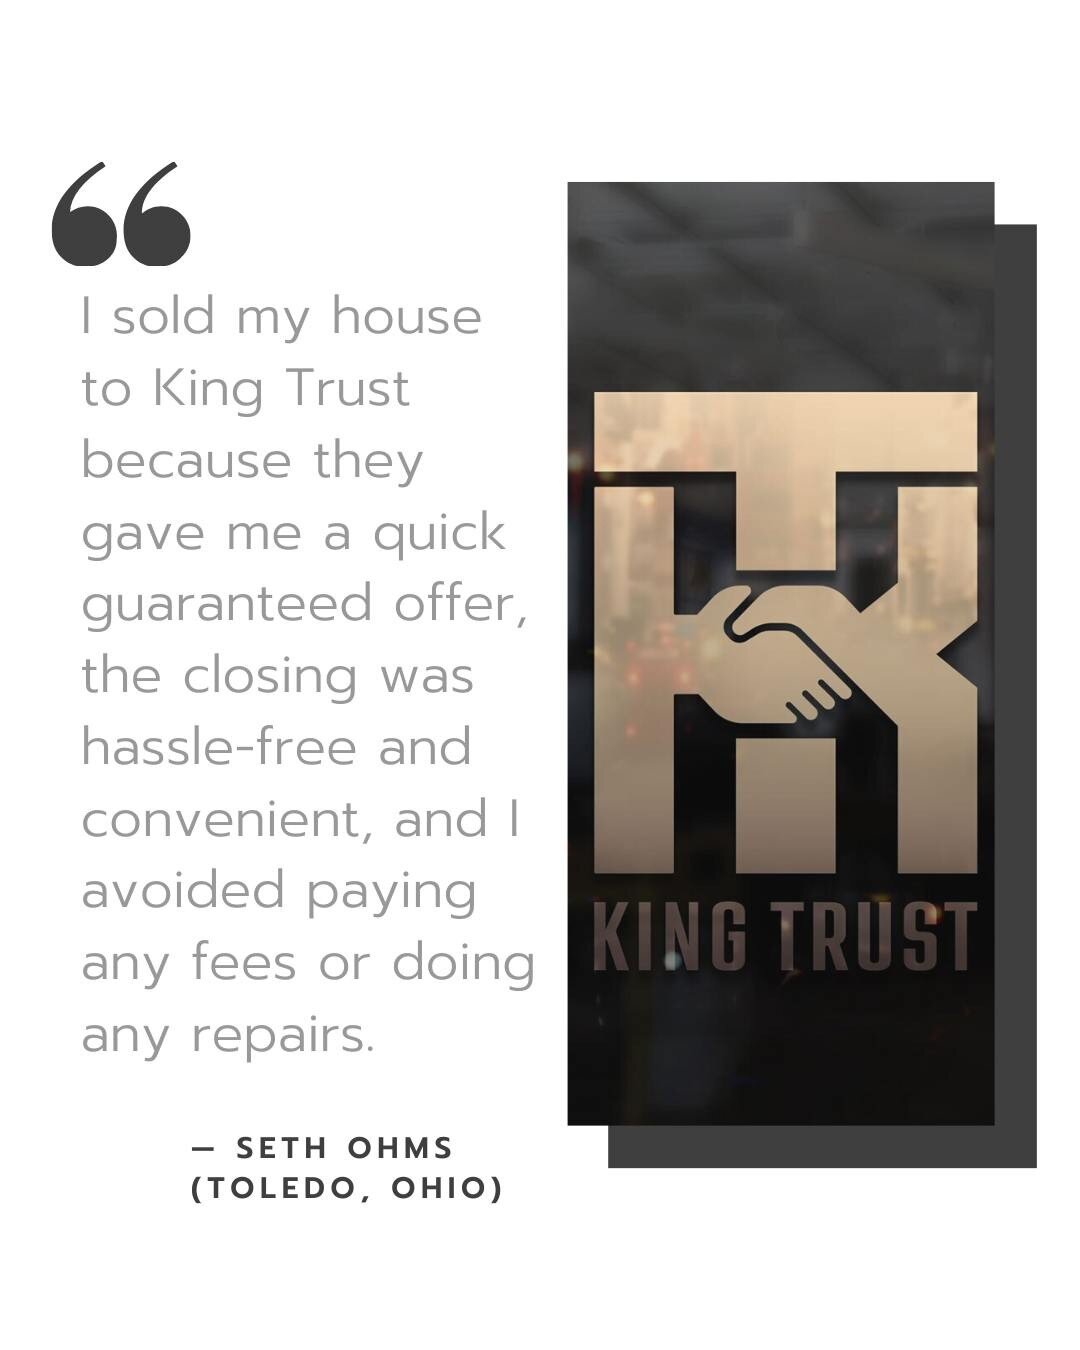 King trust is a complete real estate solution for anyone looking to buy or sell residential or commercial real estate. 

We strive to serve each individual with the same extraordinary service. Meet needs to the best of our ability. let's build and Em